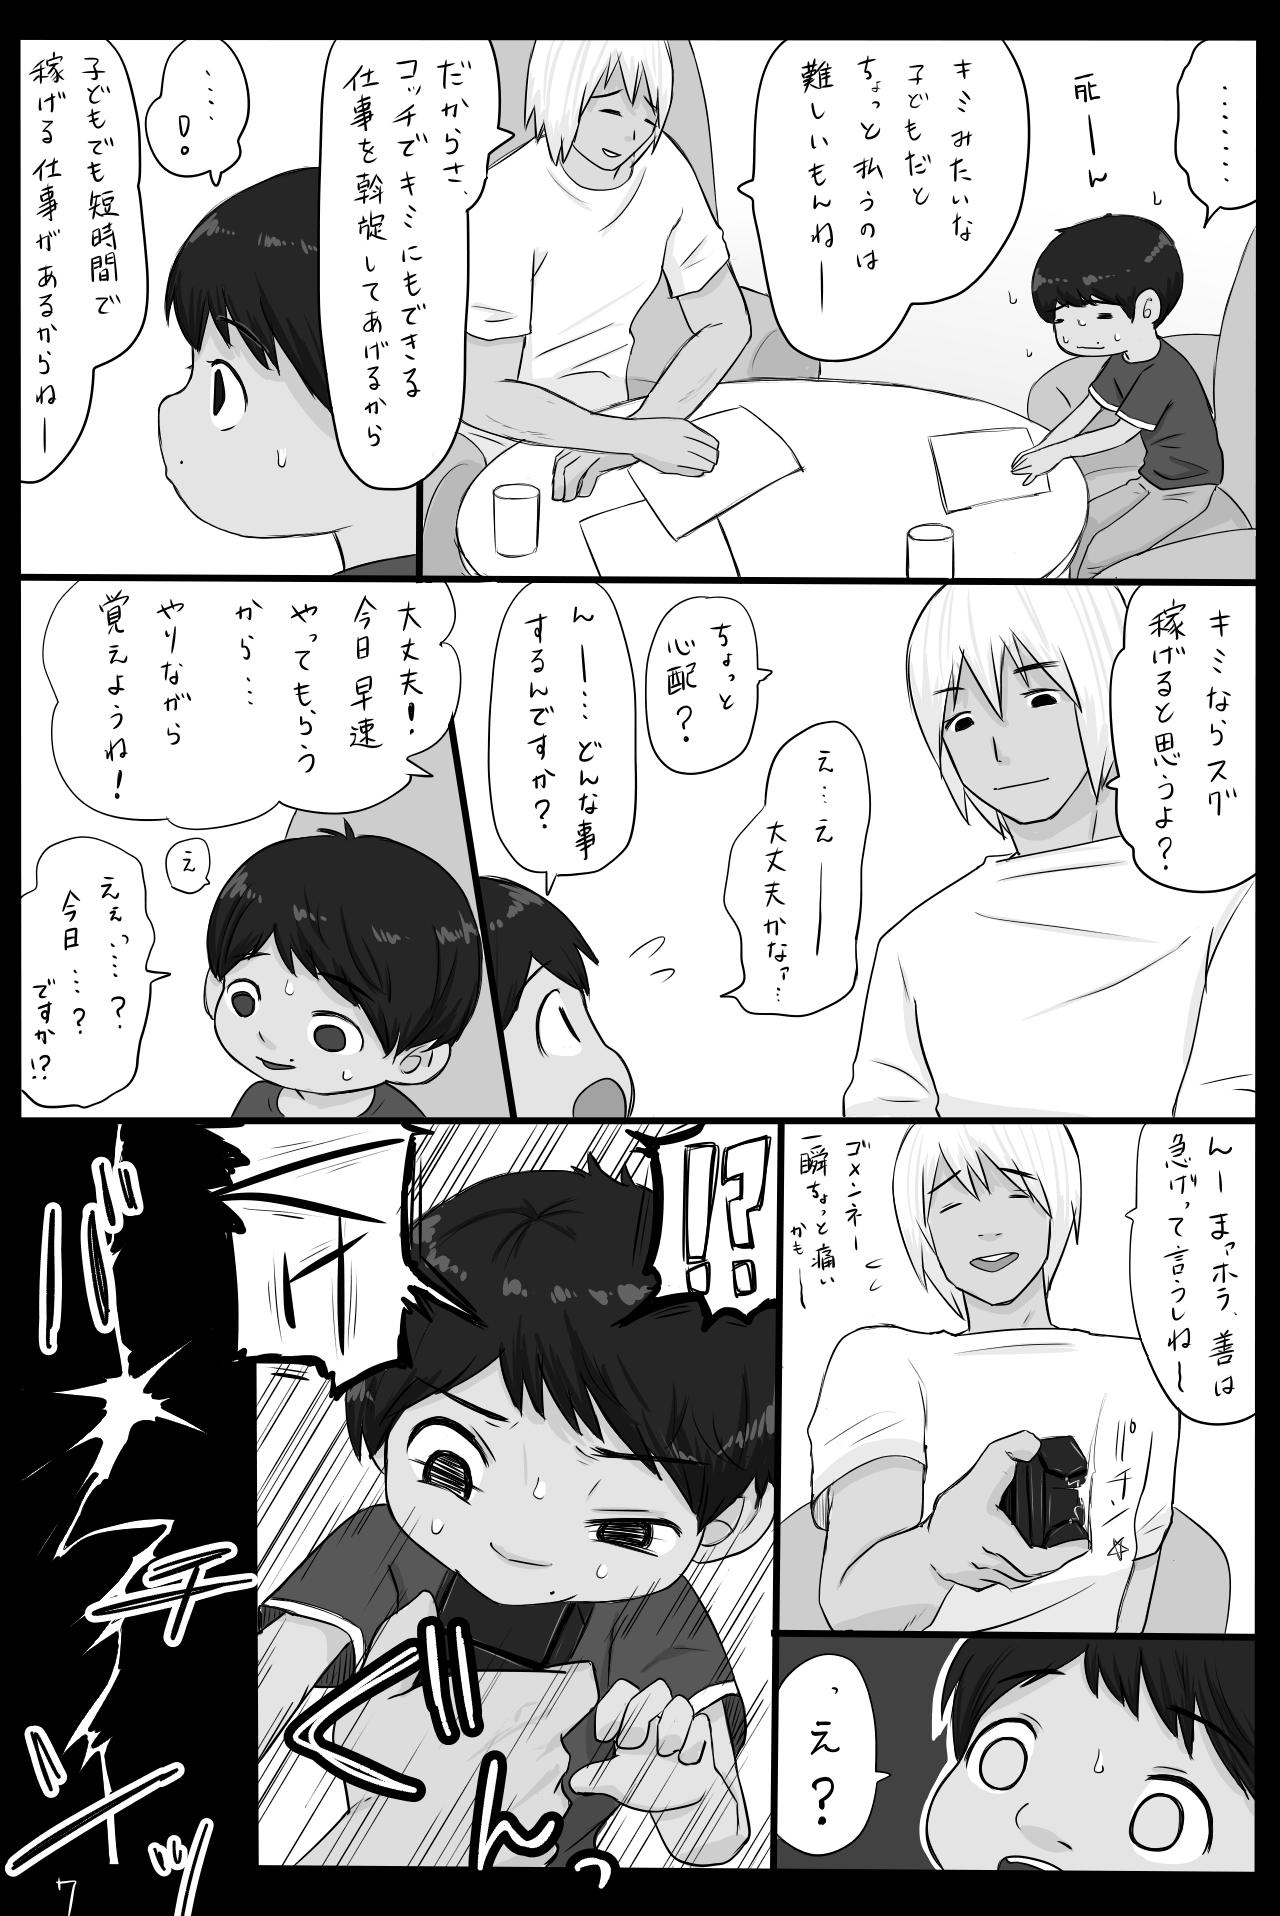 Punished 大沼信一 - Unknow Coco doujin 5 - Coco Longhair - Page 8